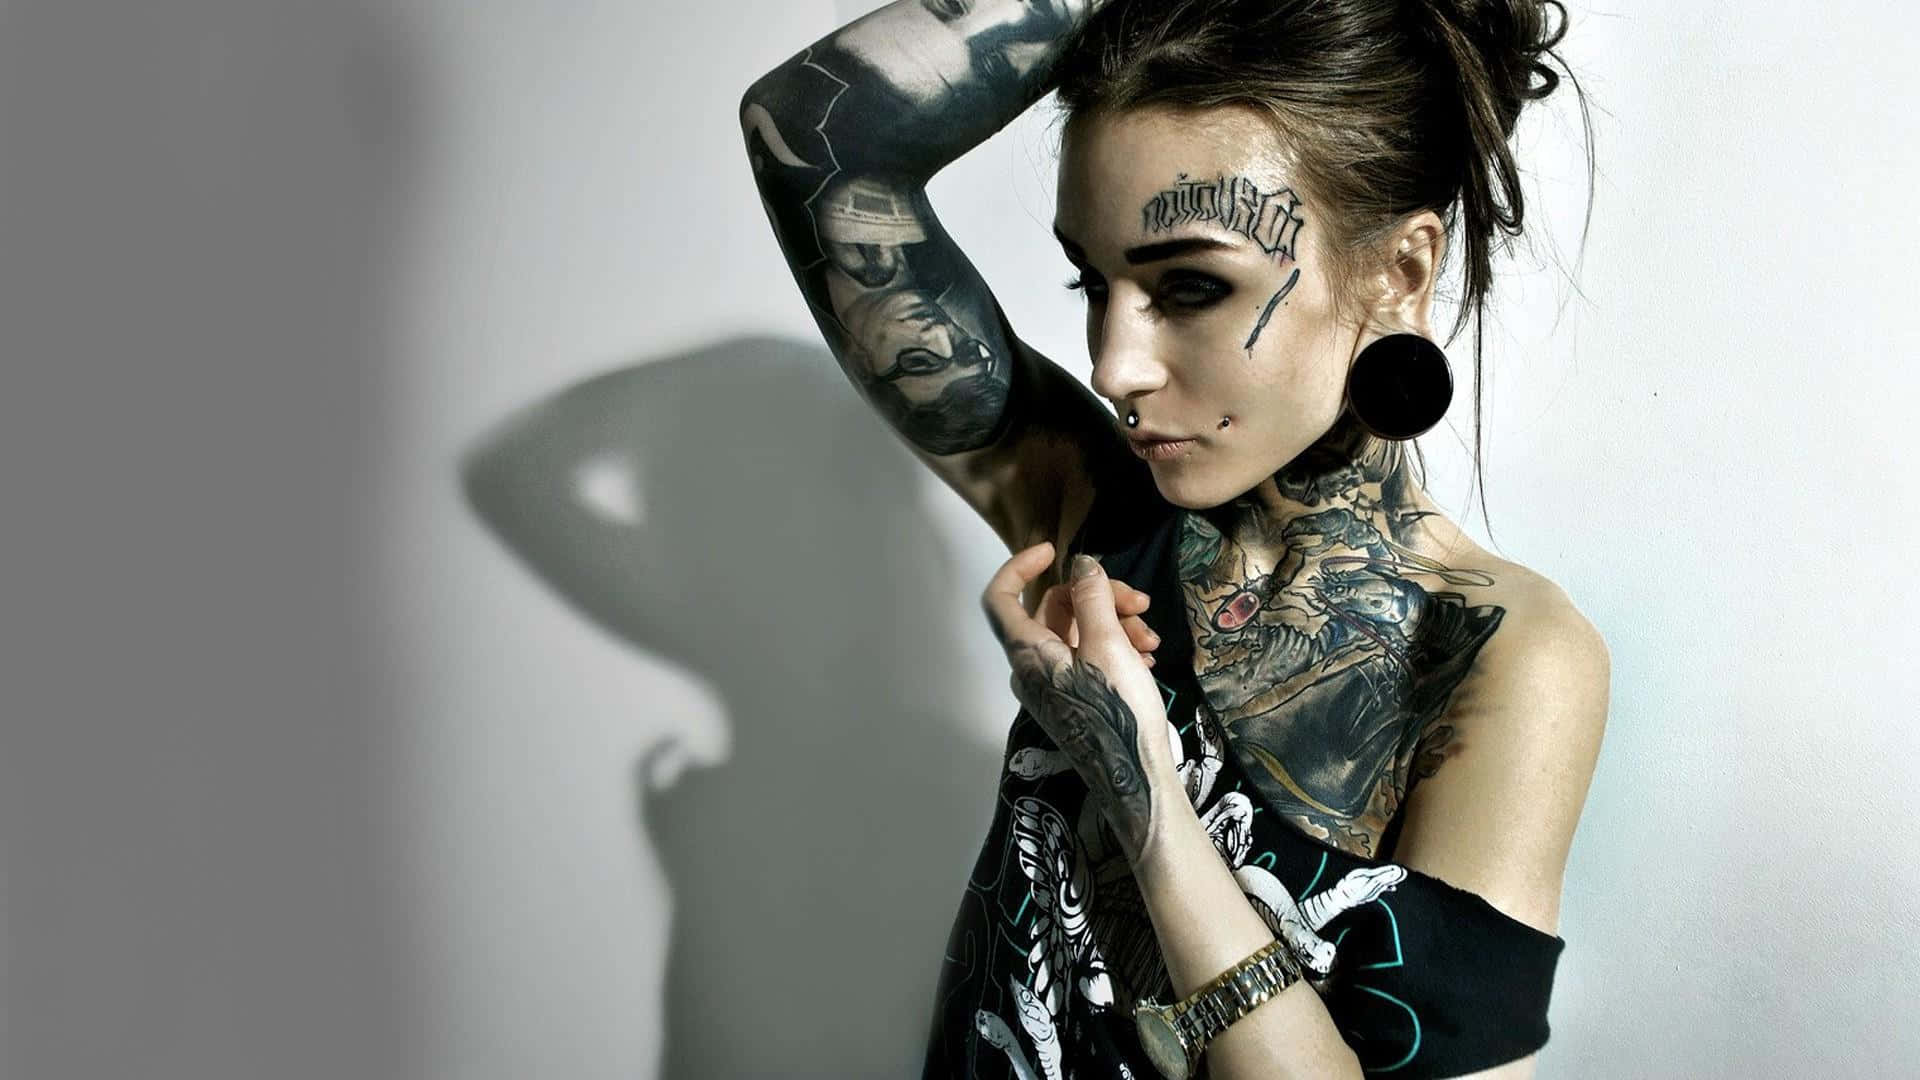 A Woman With Tattoos On Her Arm Posing